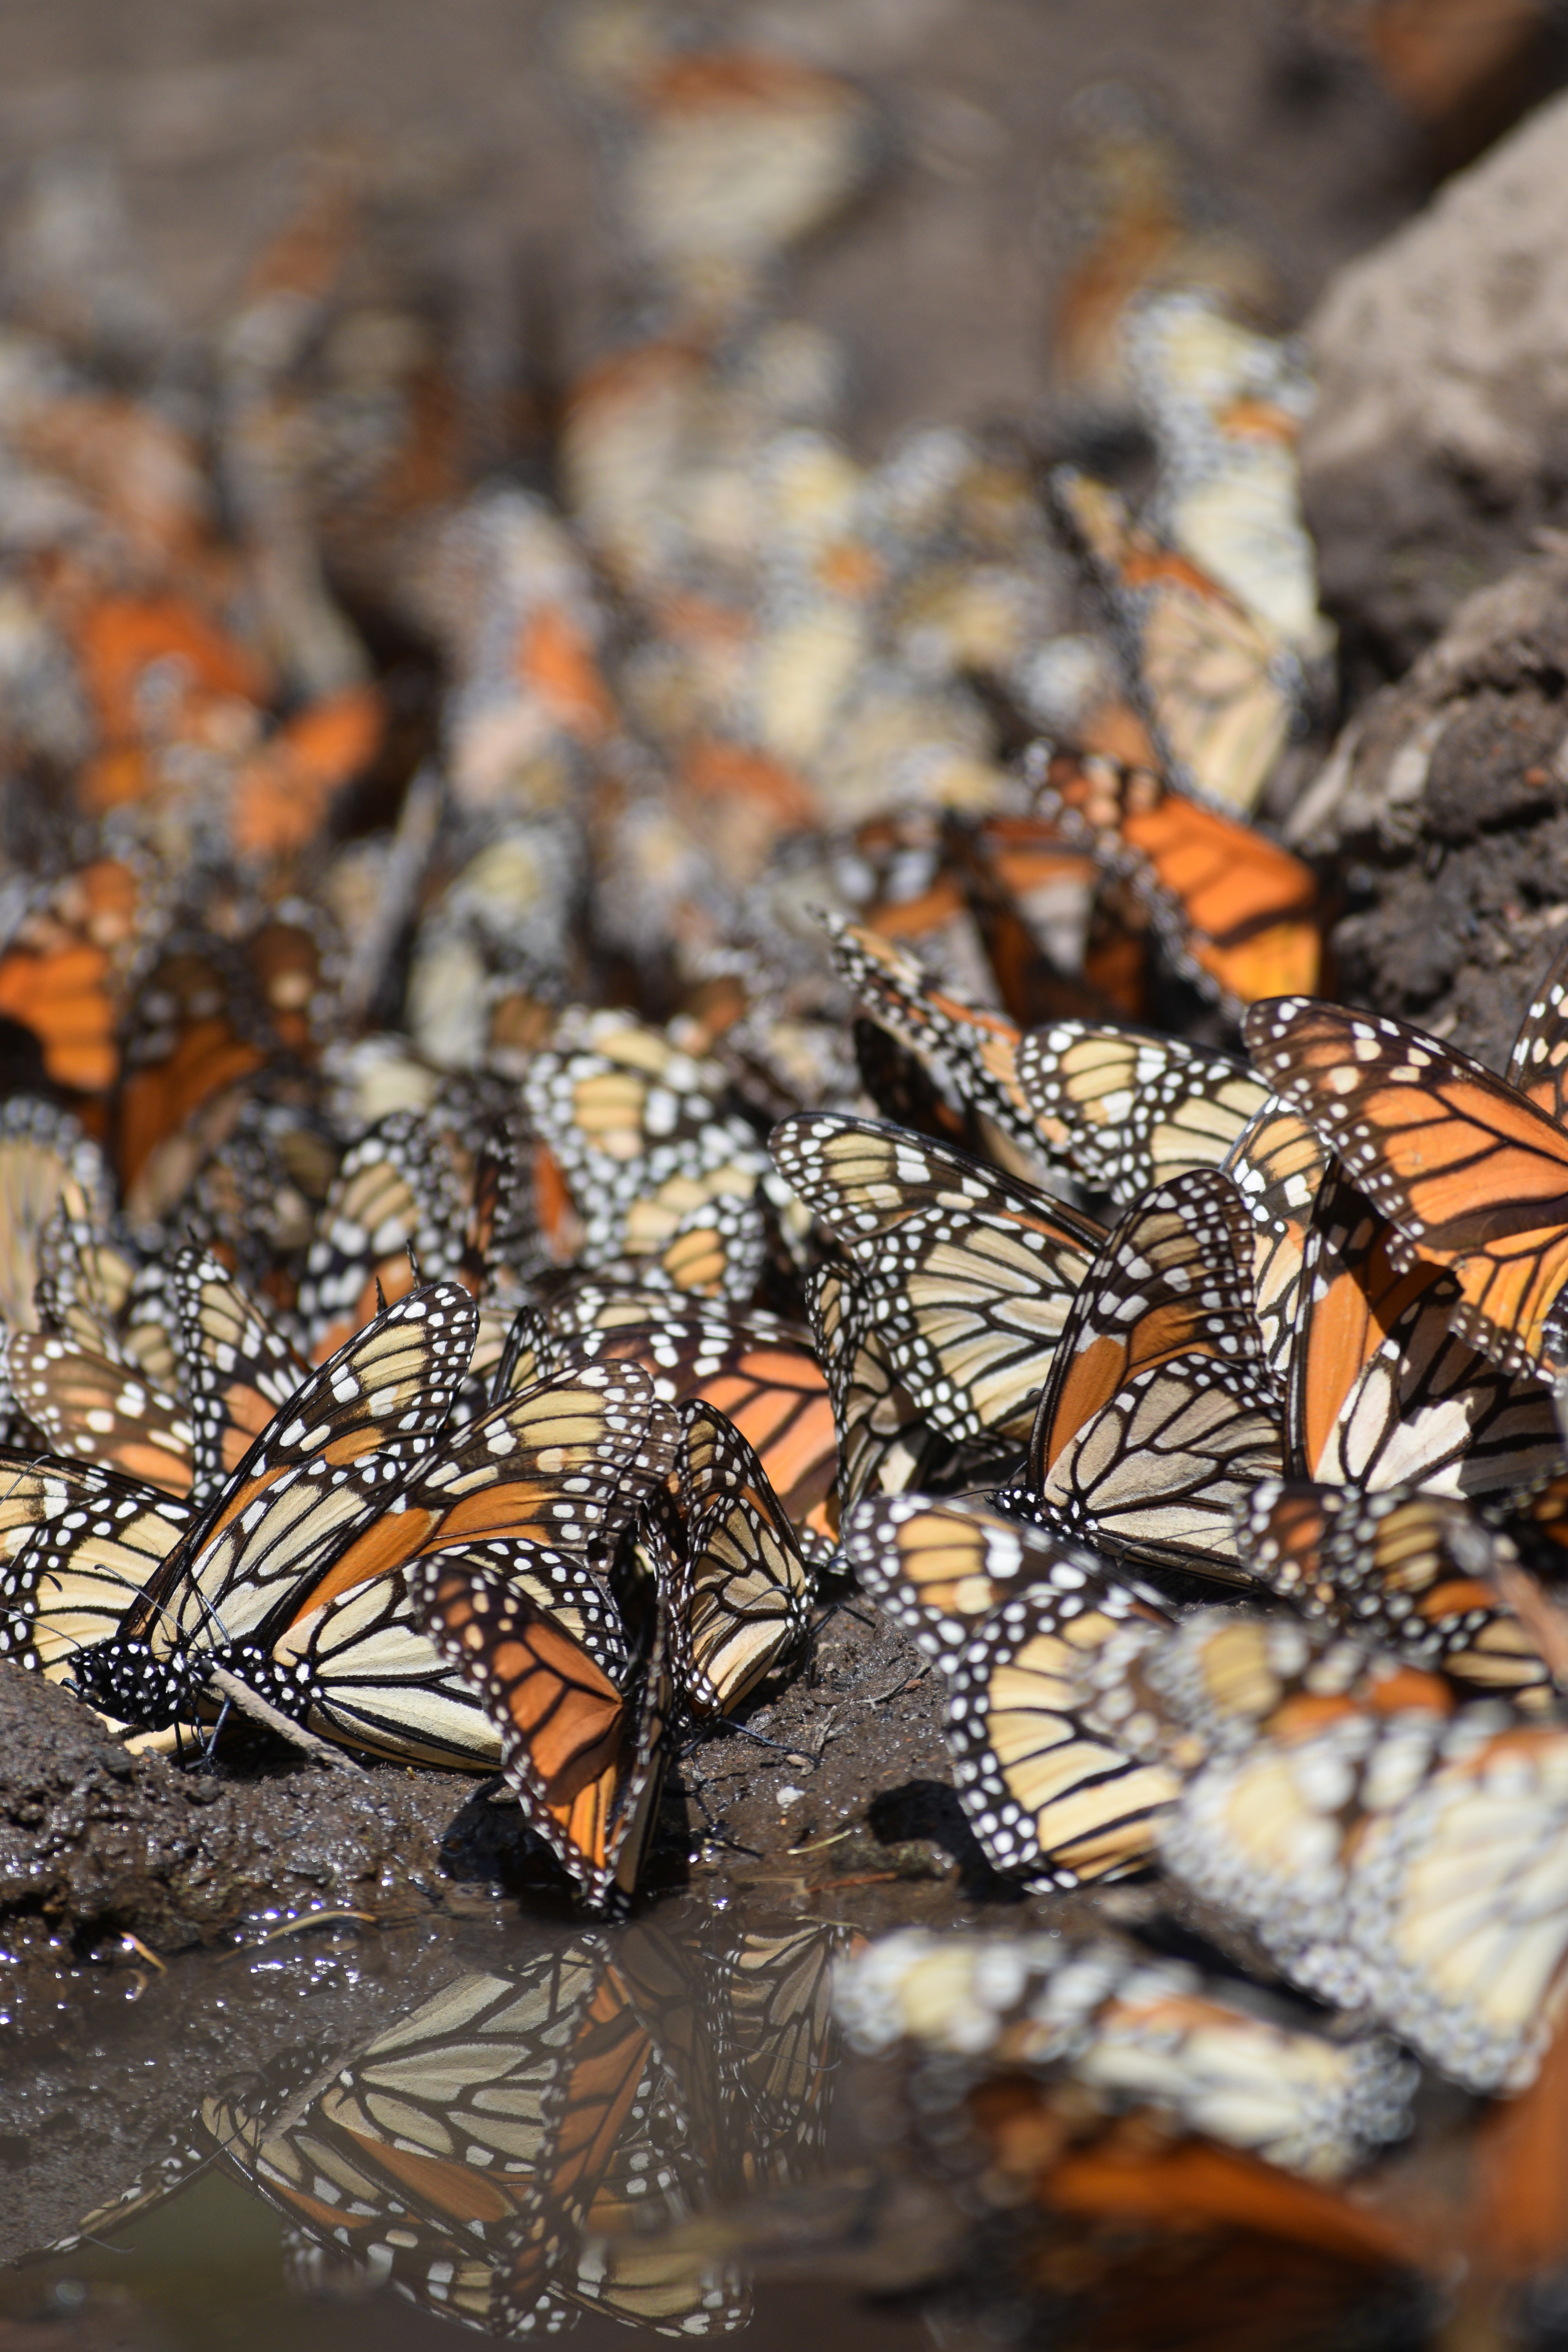 Monarchs stand close together on muddy ground on the edge of a puddle.